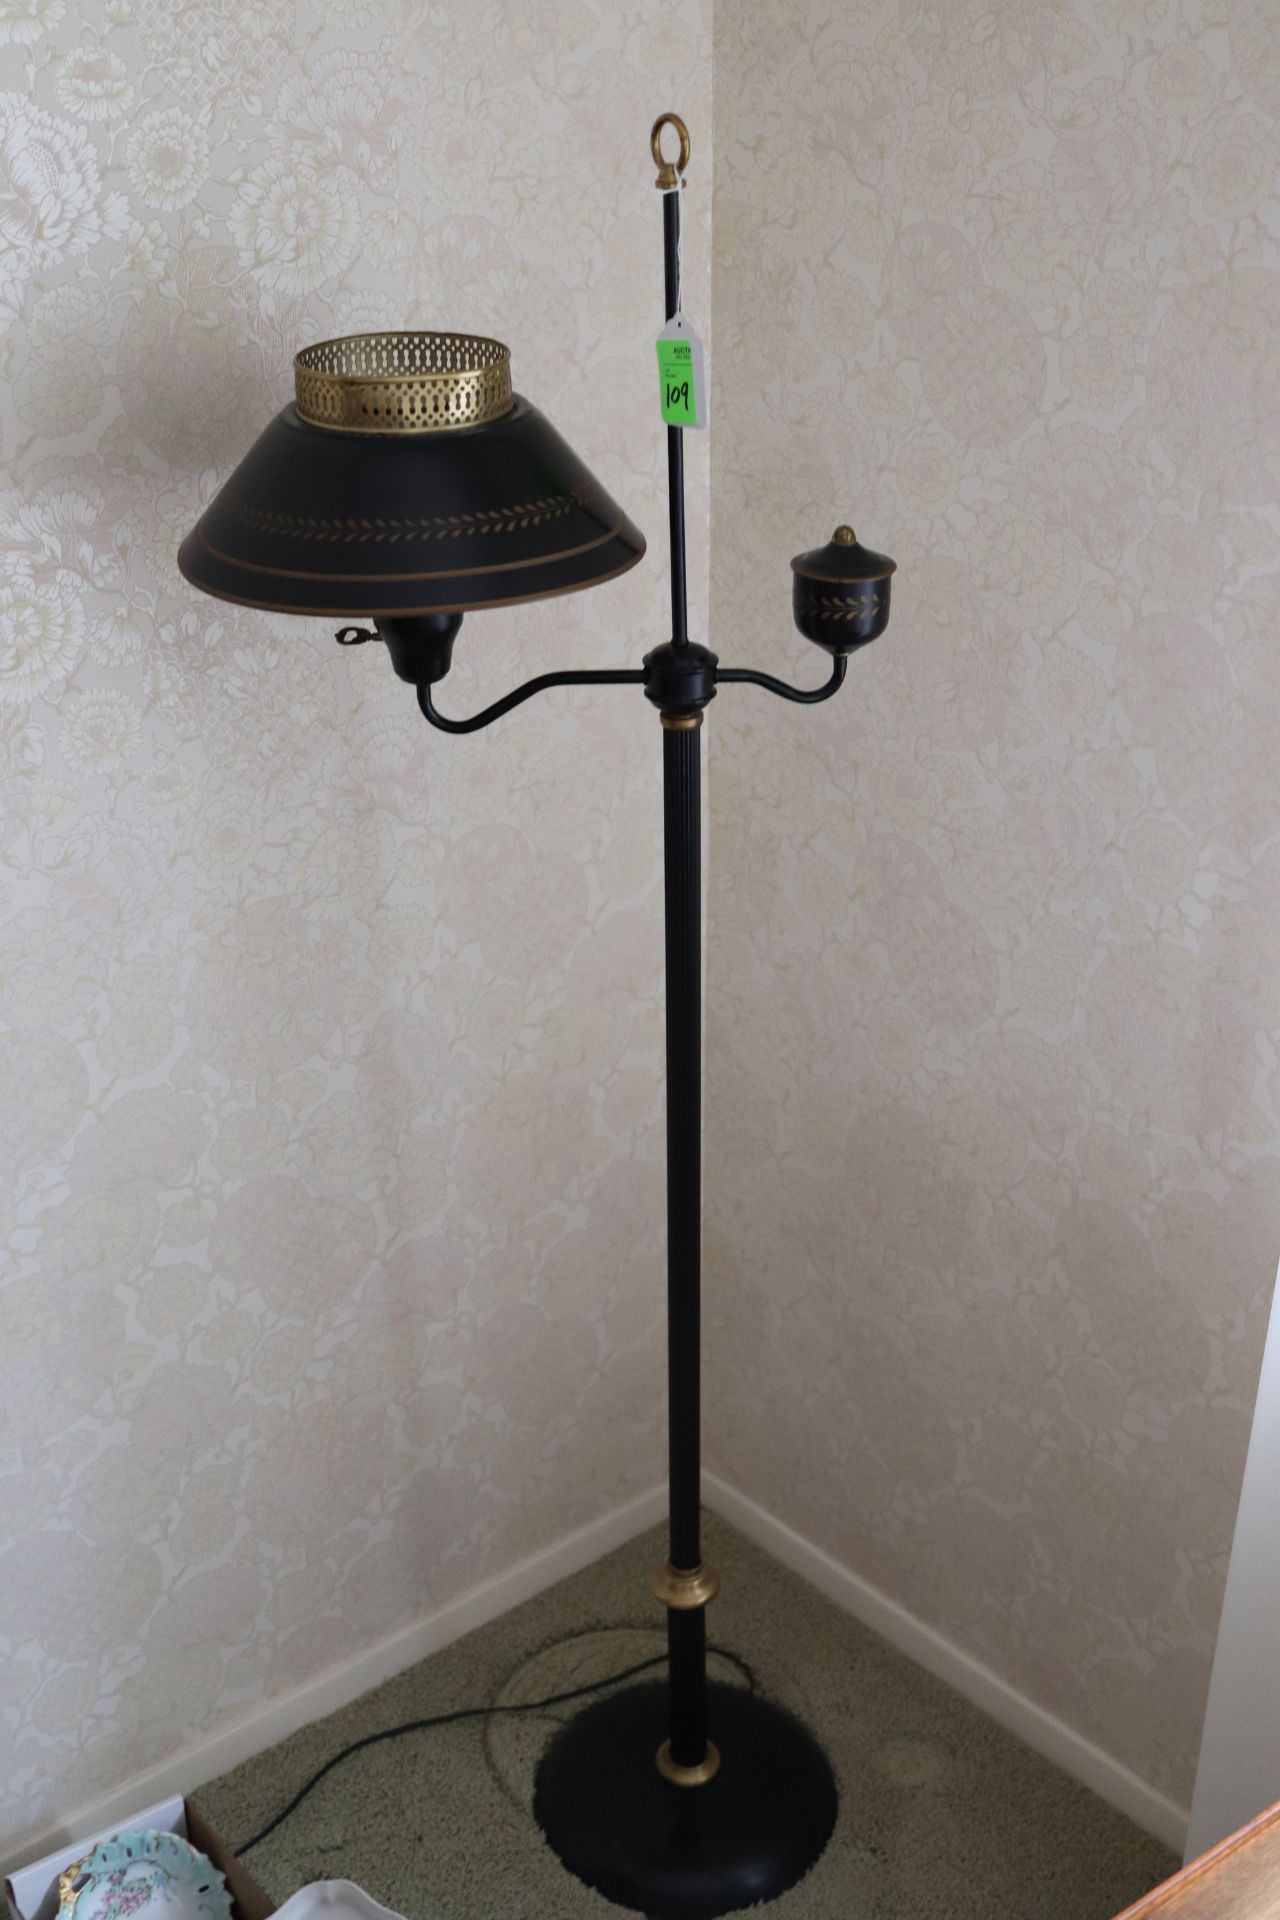 English style black and gilt finish floor lamp, approximate height 55"